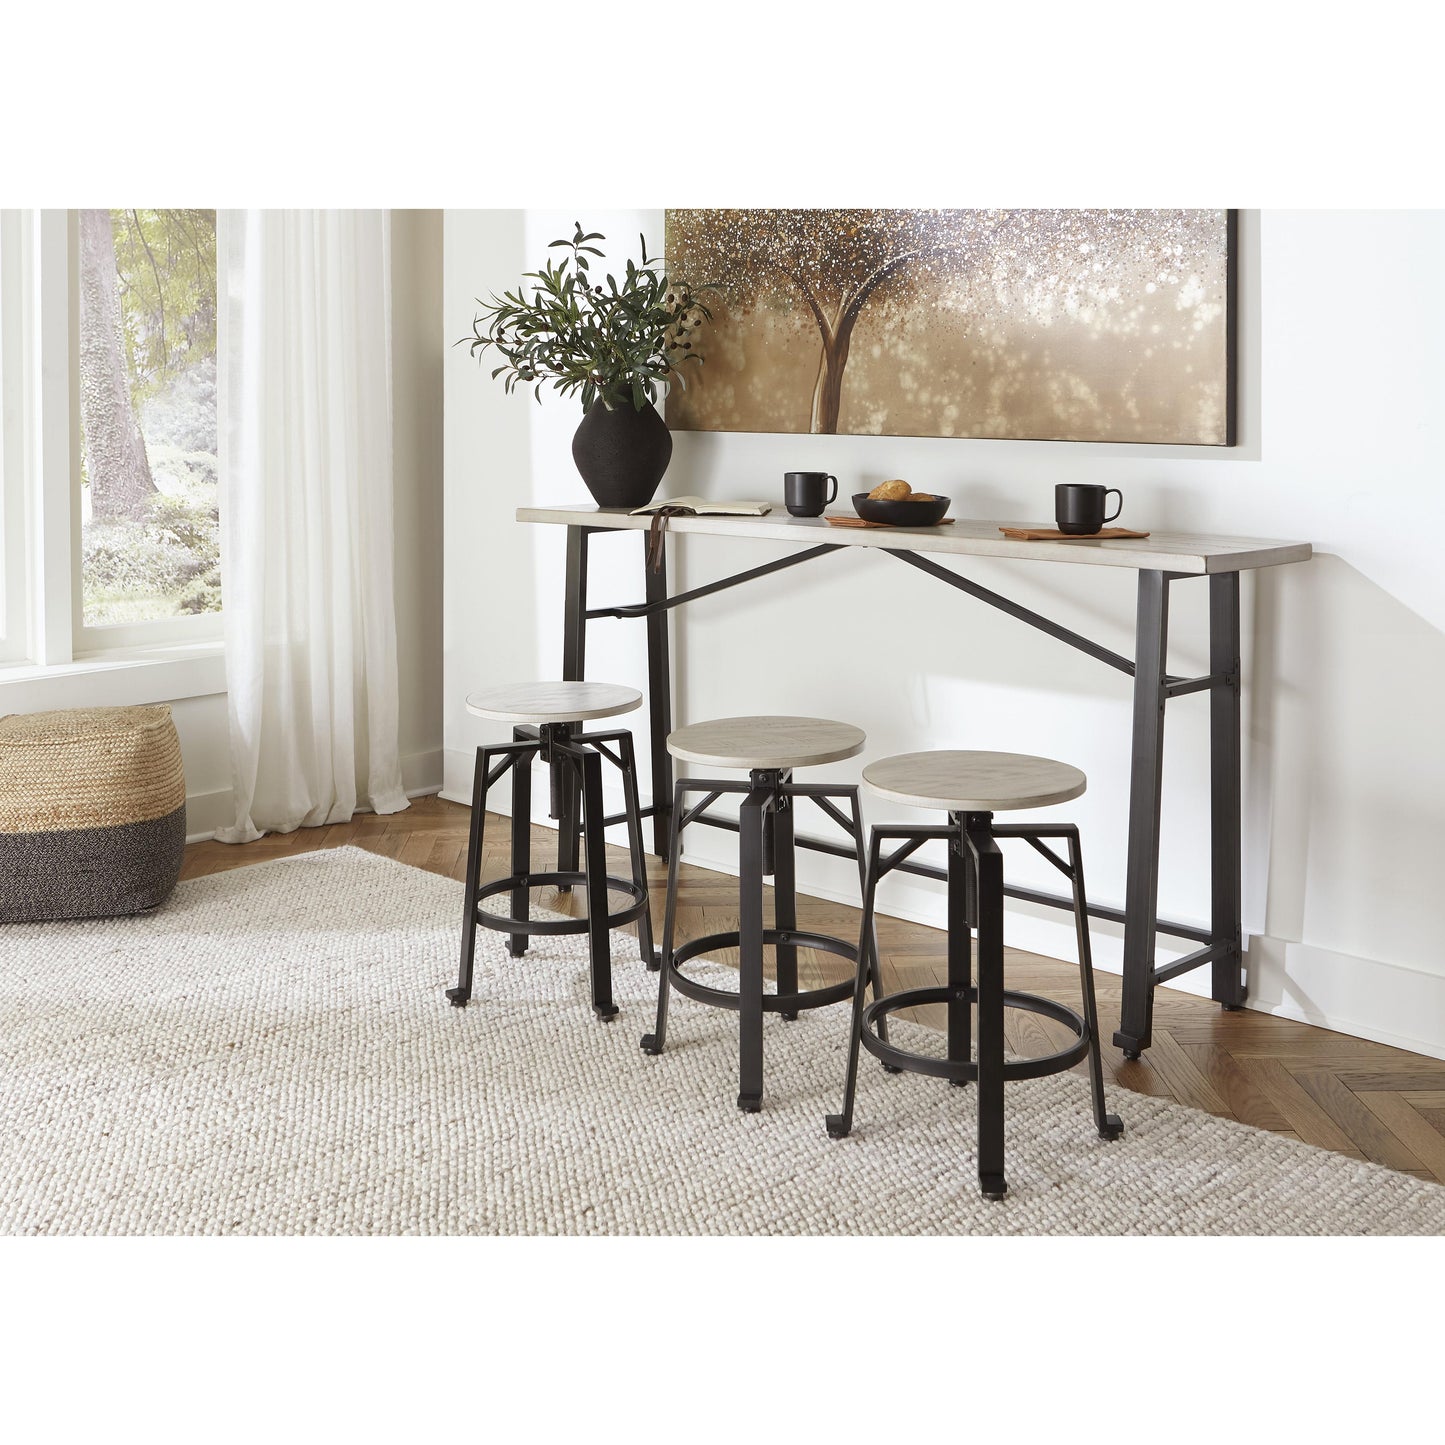 Signature Design by Ashley Karisslyn Counter Height Dining Table with Trestle Base D336-52 IMAGE 9